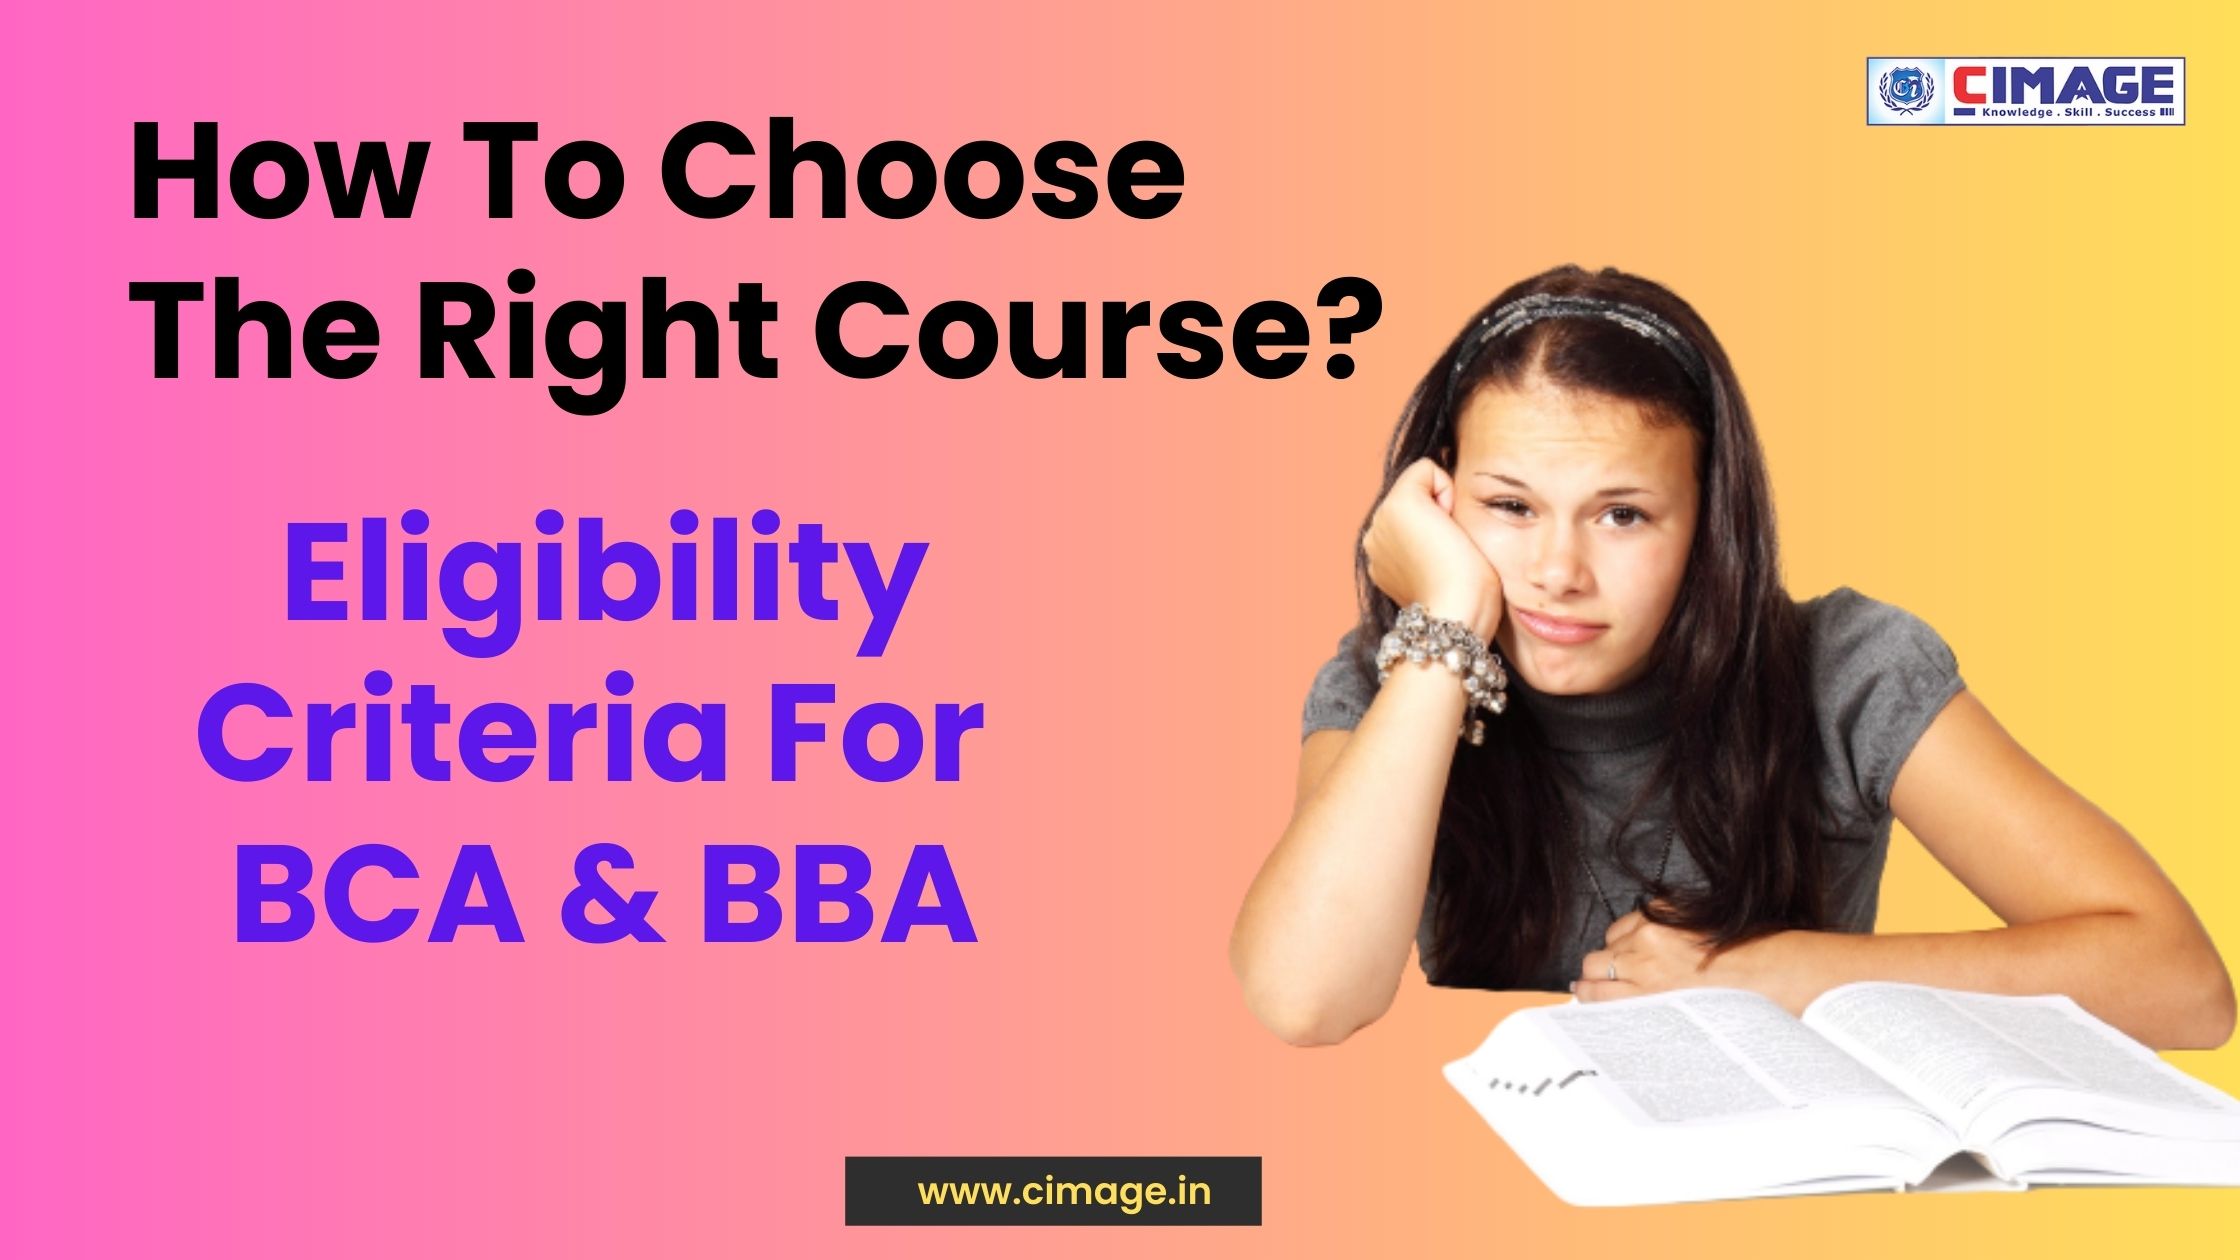 How To Choose The Right Course? What Are The Eligibility Criteria For BCA And BBA?